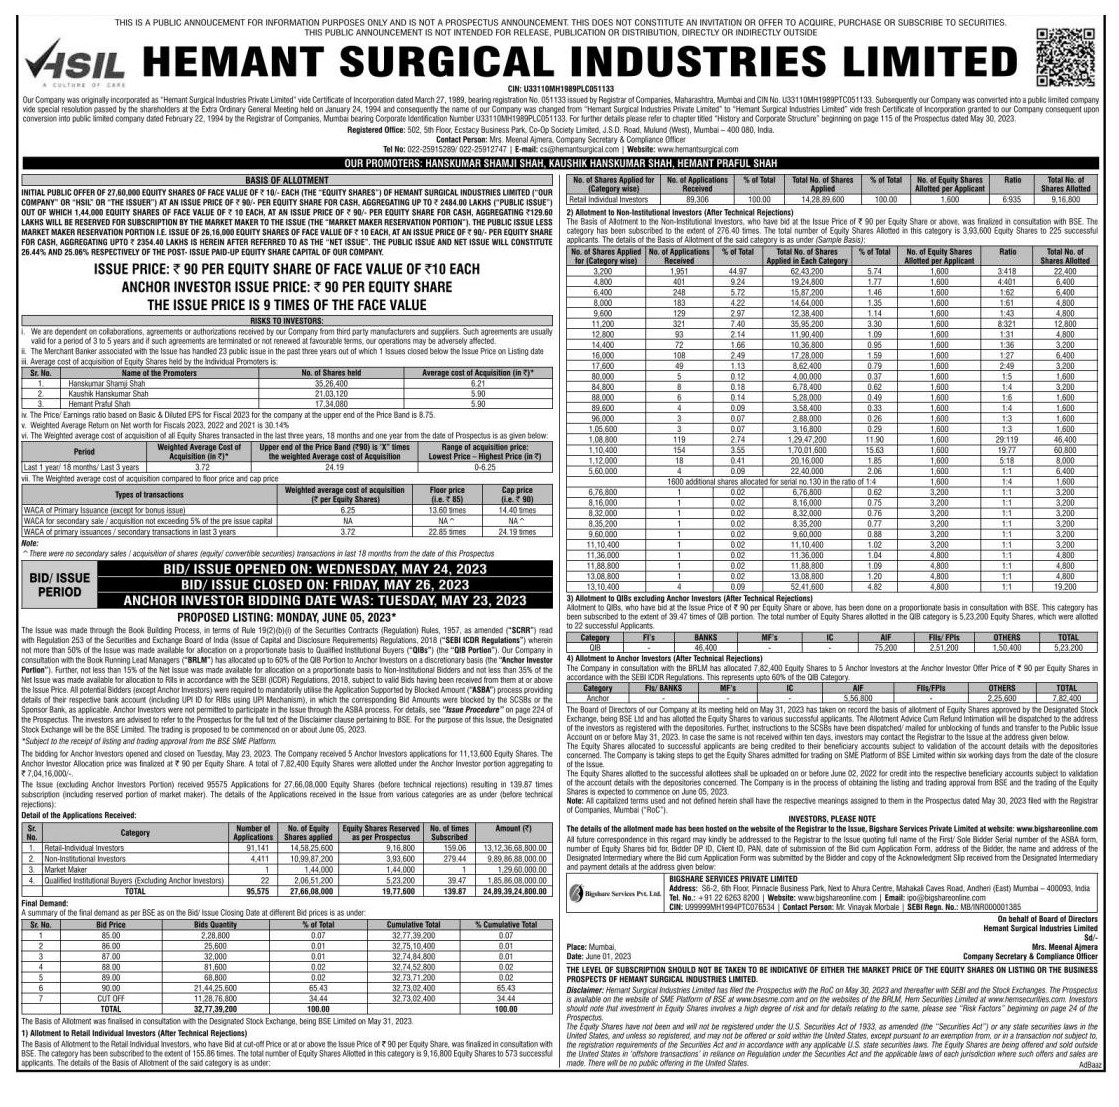 Hemant Surgical Industries Limited IPO Basis of Allotment